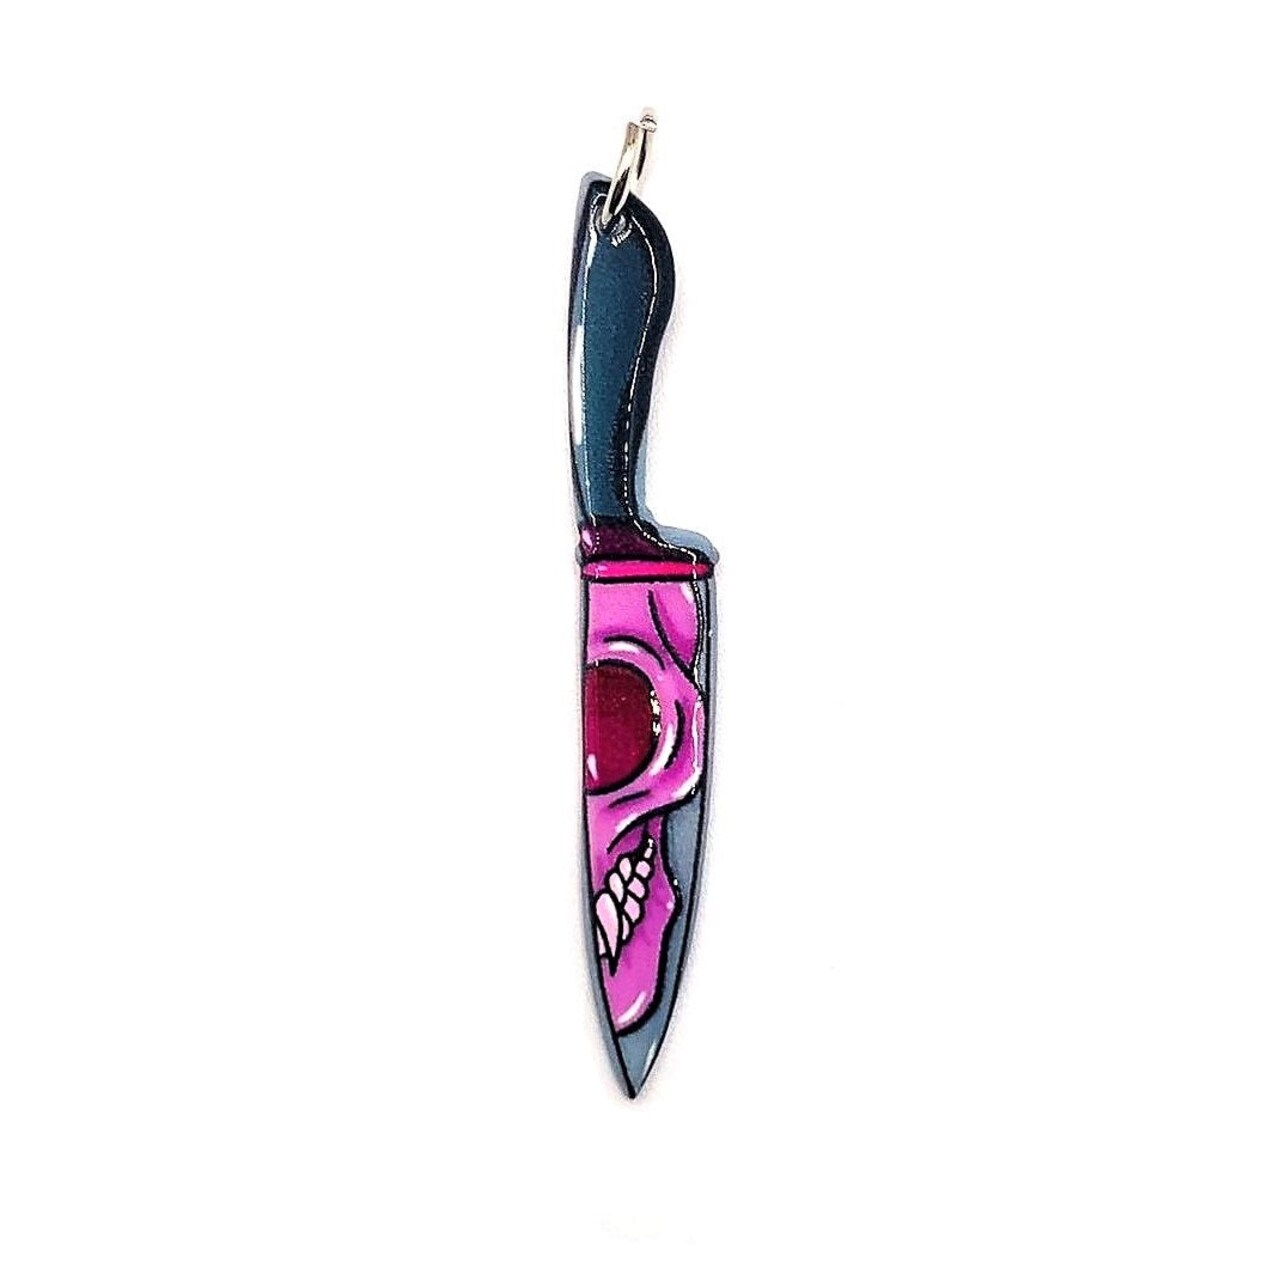 1, 4 or 20 Pieces: Black and Pink Knife with Skull Face Halloween Charms -  Double Sided